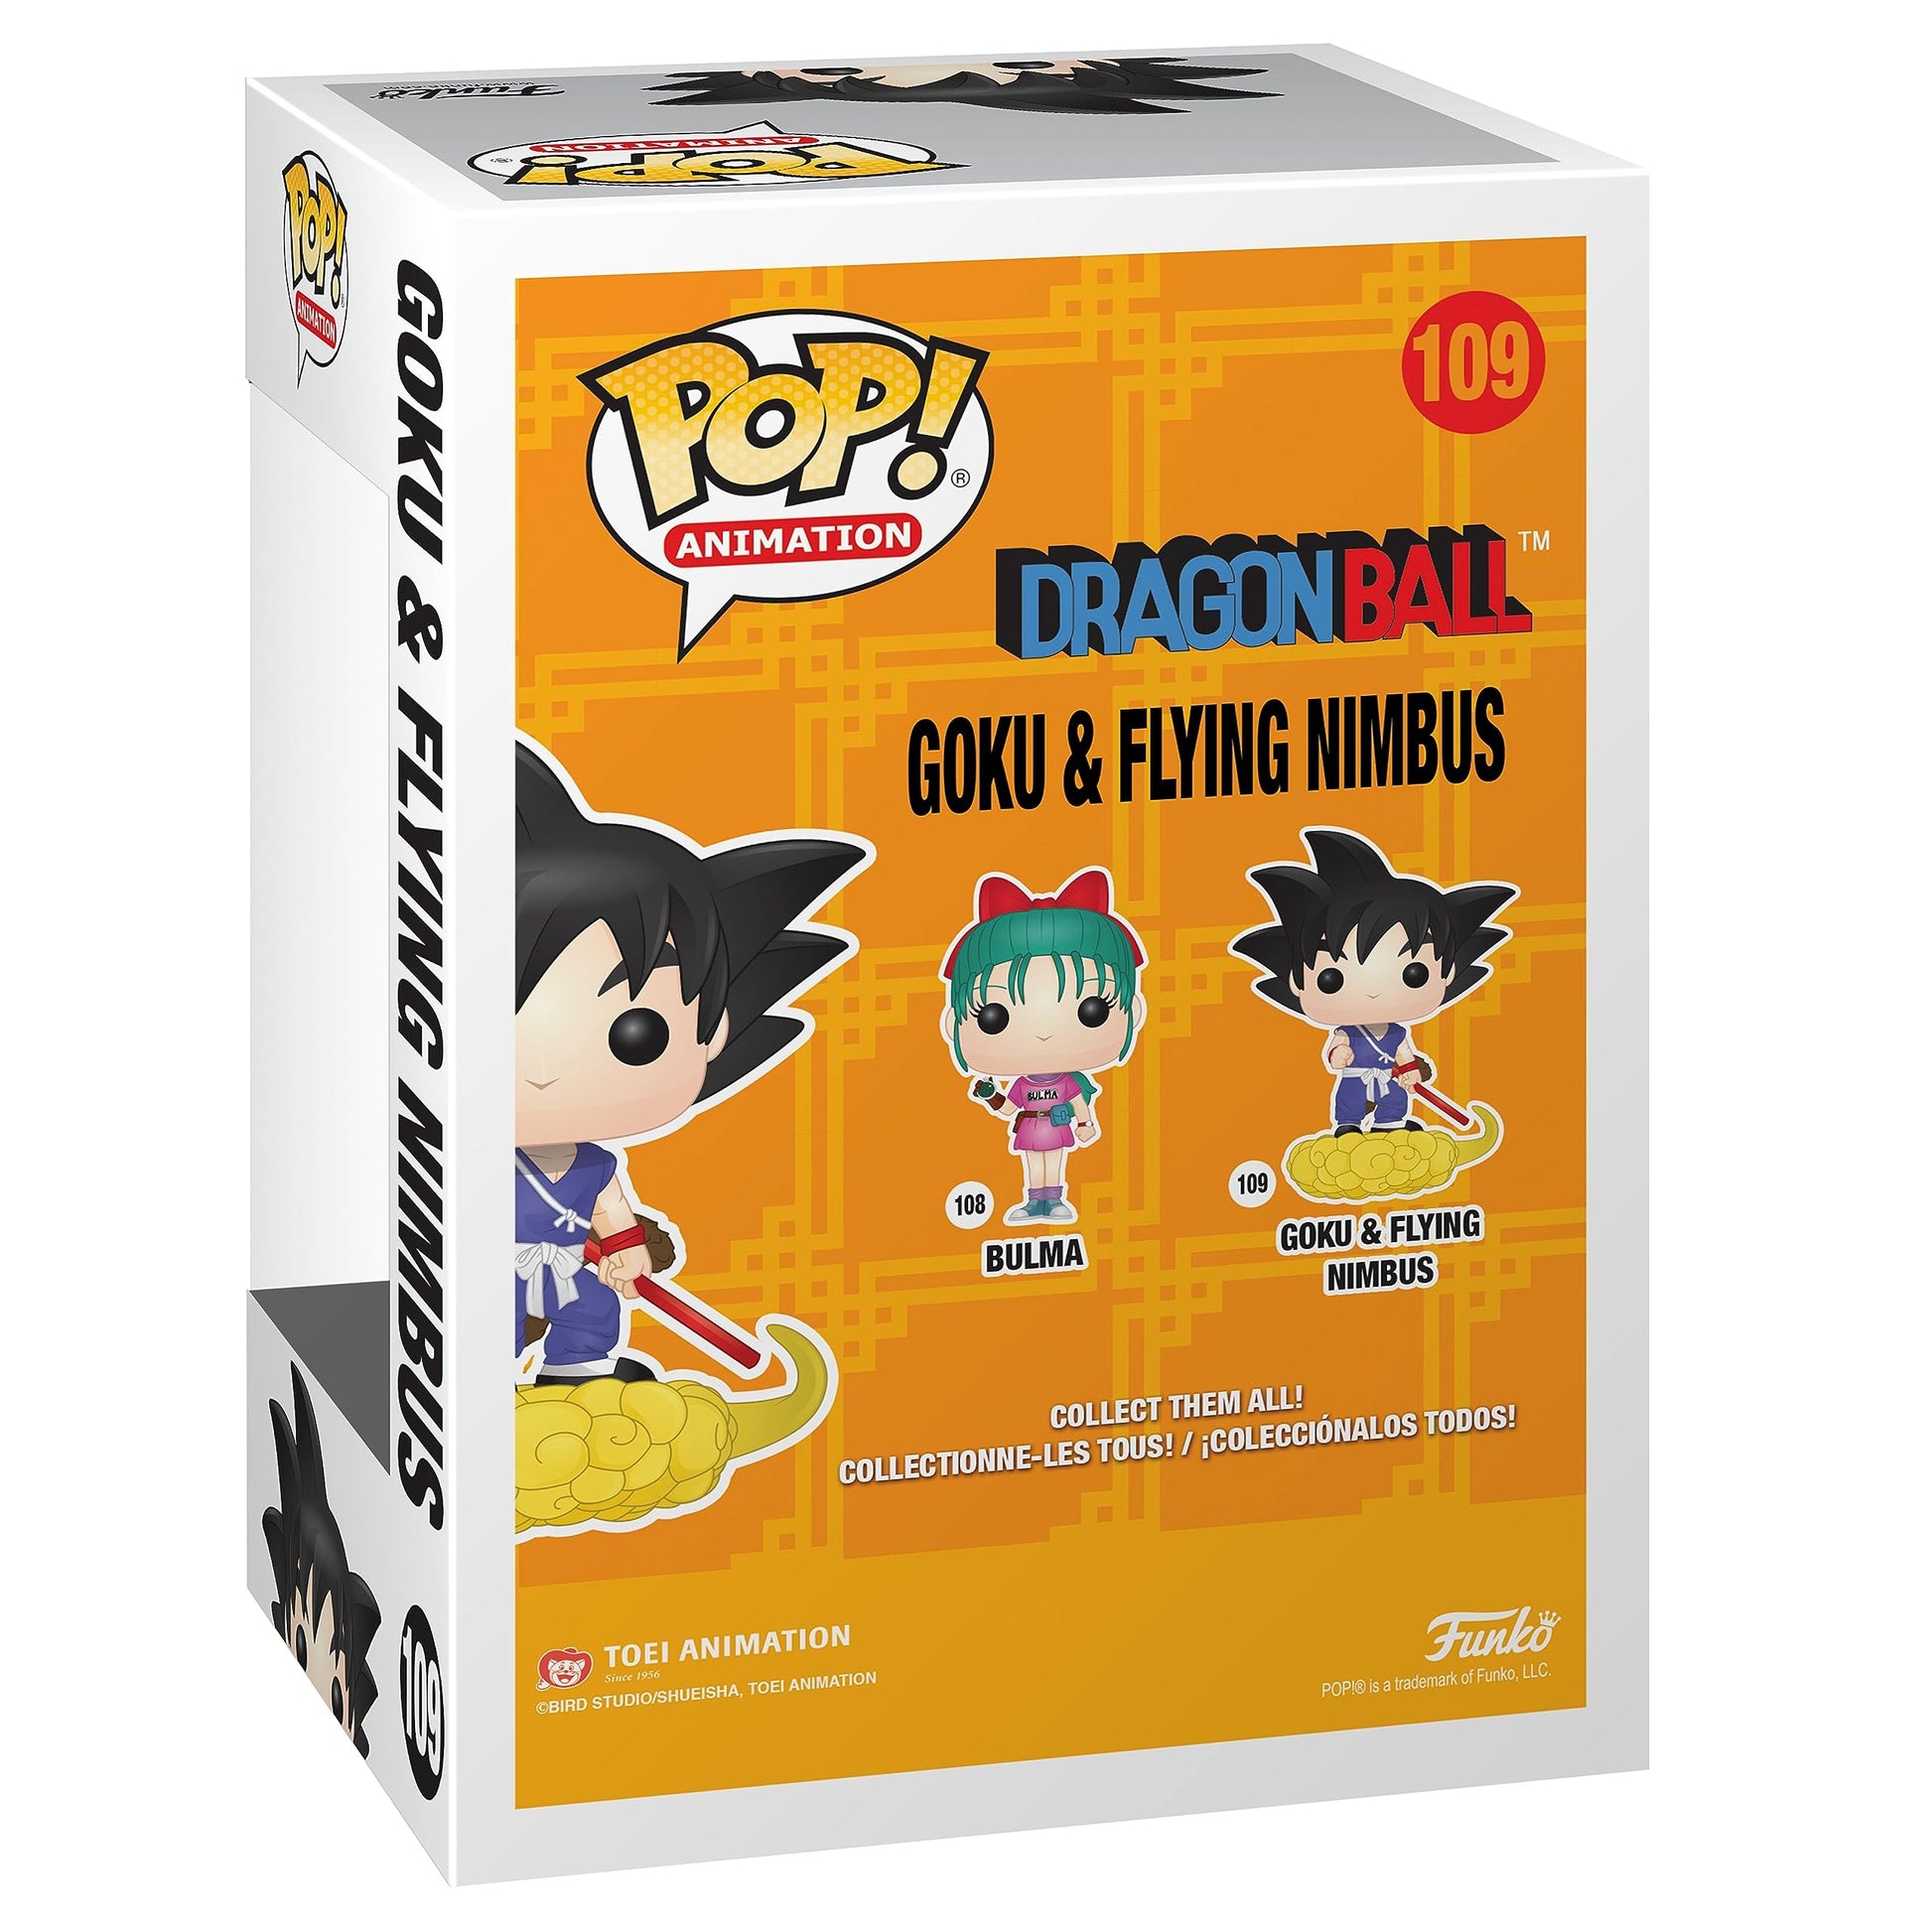 Funko POP! Vinyl - Dragonball Z - Goku and Nimbus Figure - Collectable Vinyl Figure - Gift Idea - Official Merchandise - Toys for Kids & Adults - Anime Fans - Model Figure for Collectors and Display - Zippigames